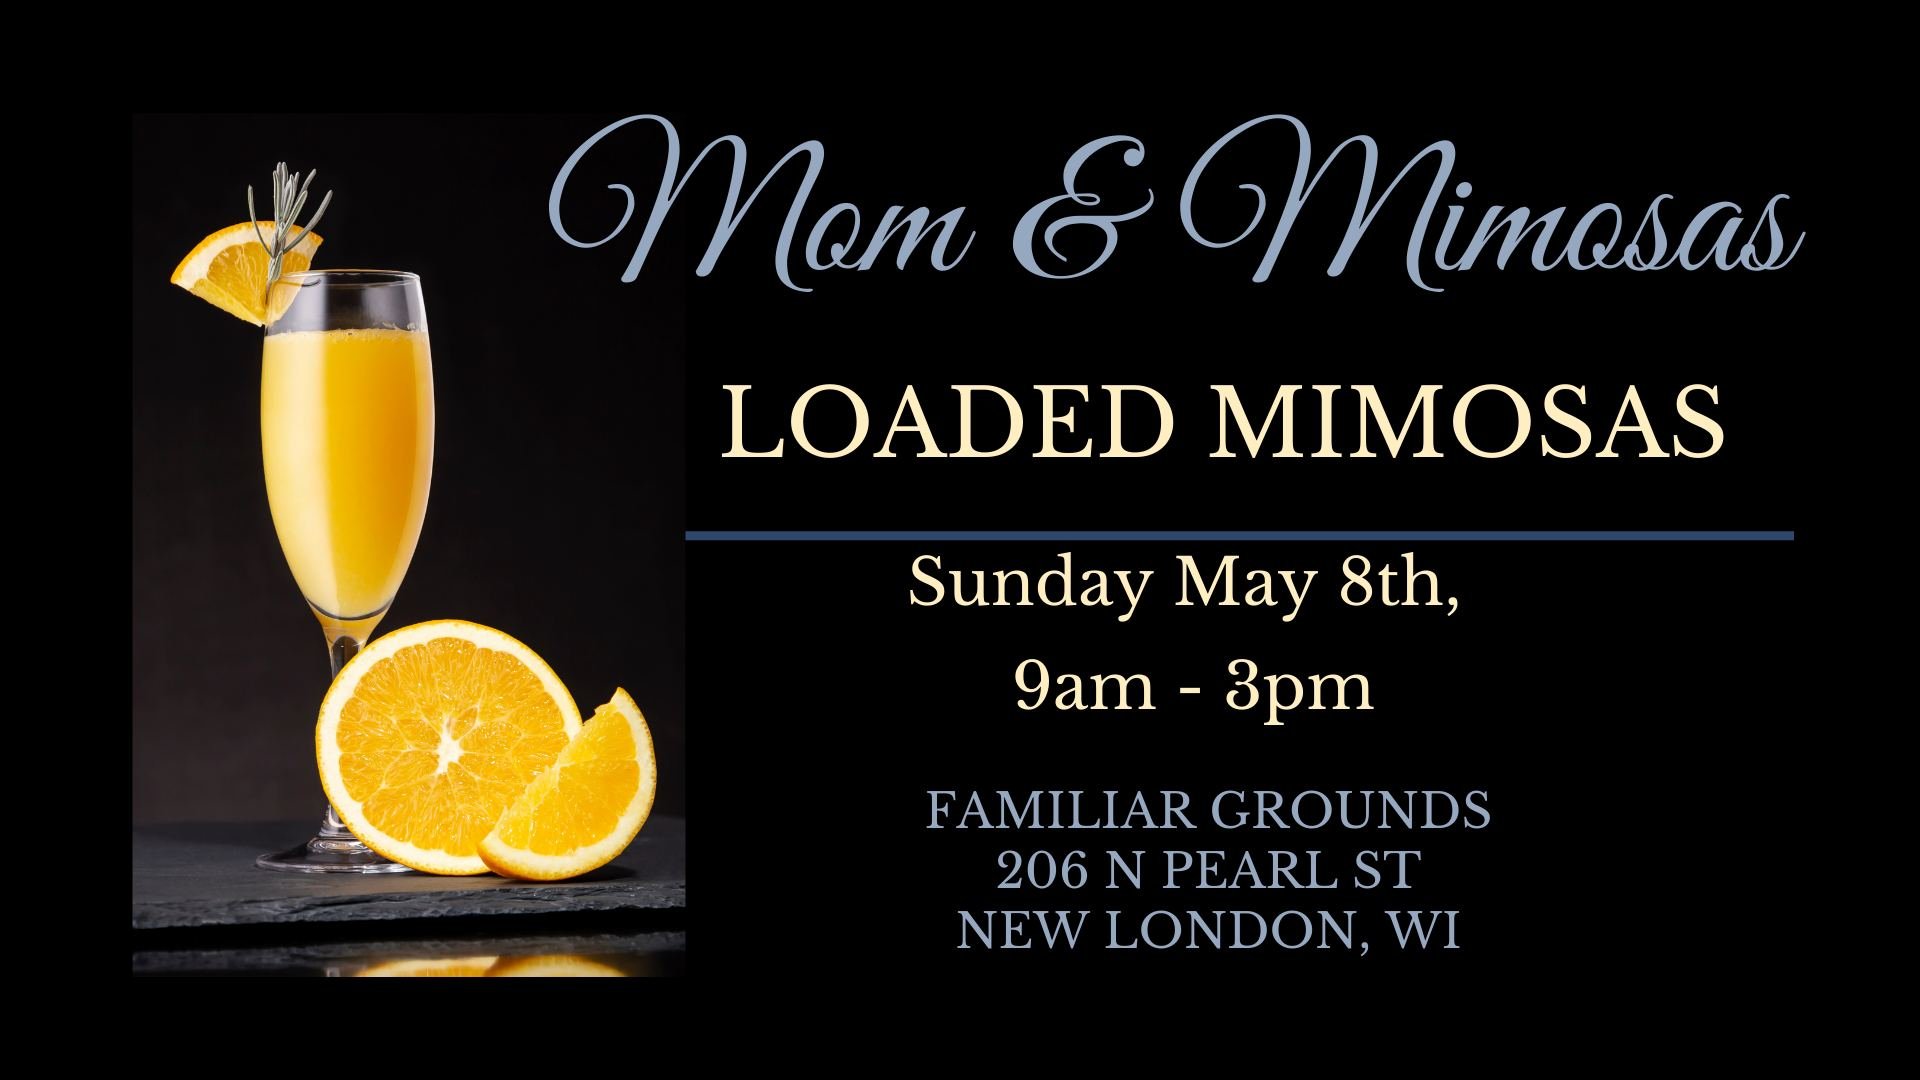 Familiar Grounds Mimosas for Mothers